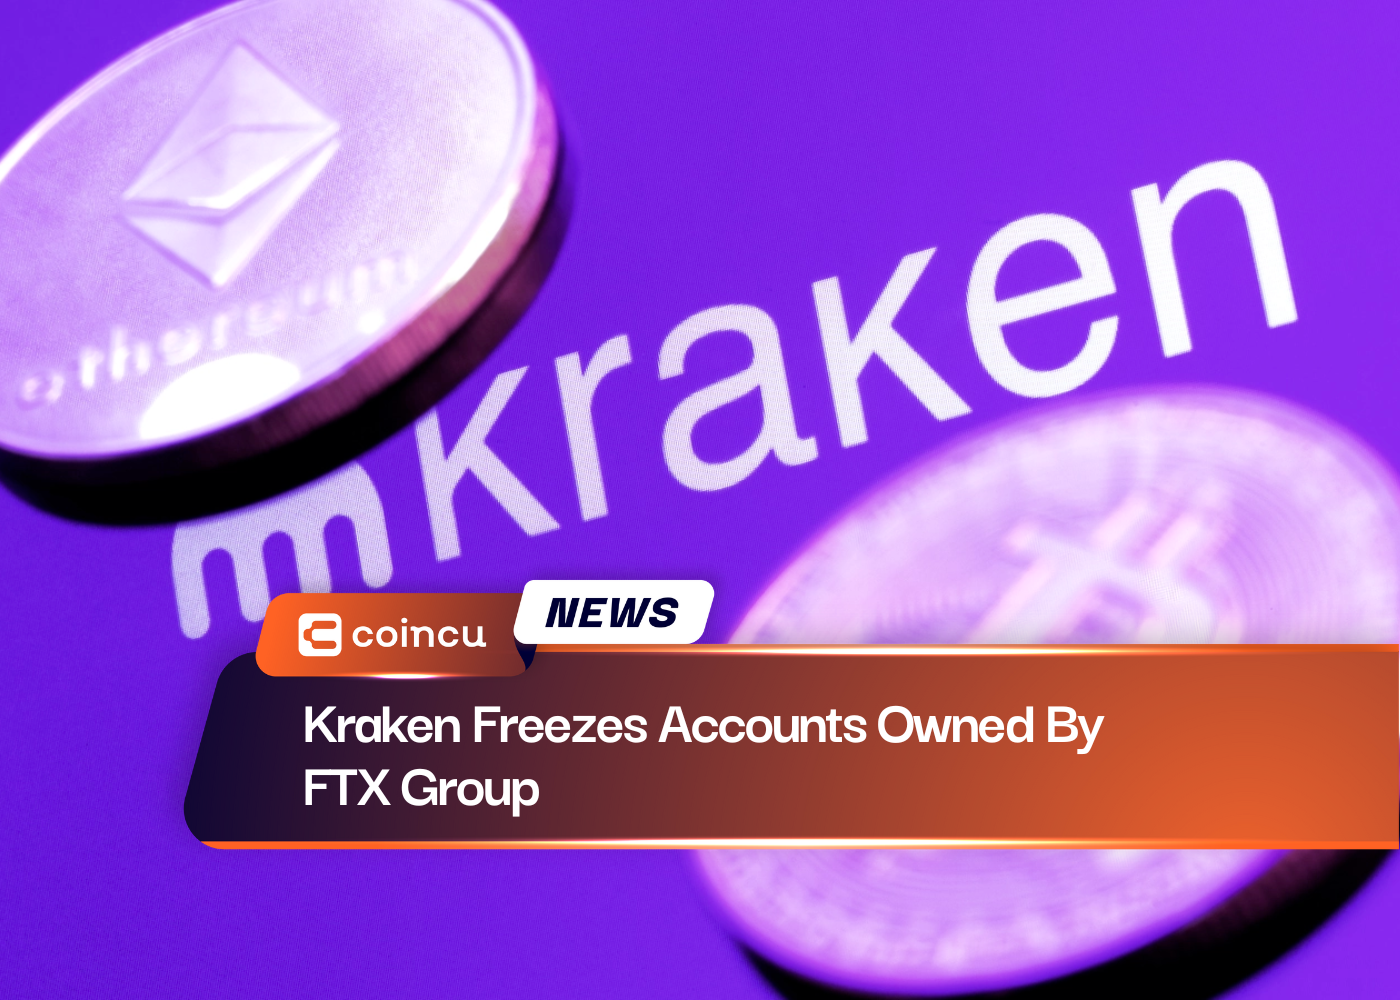 Kraken Freezes Accounts Owned By FTX Group